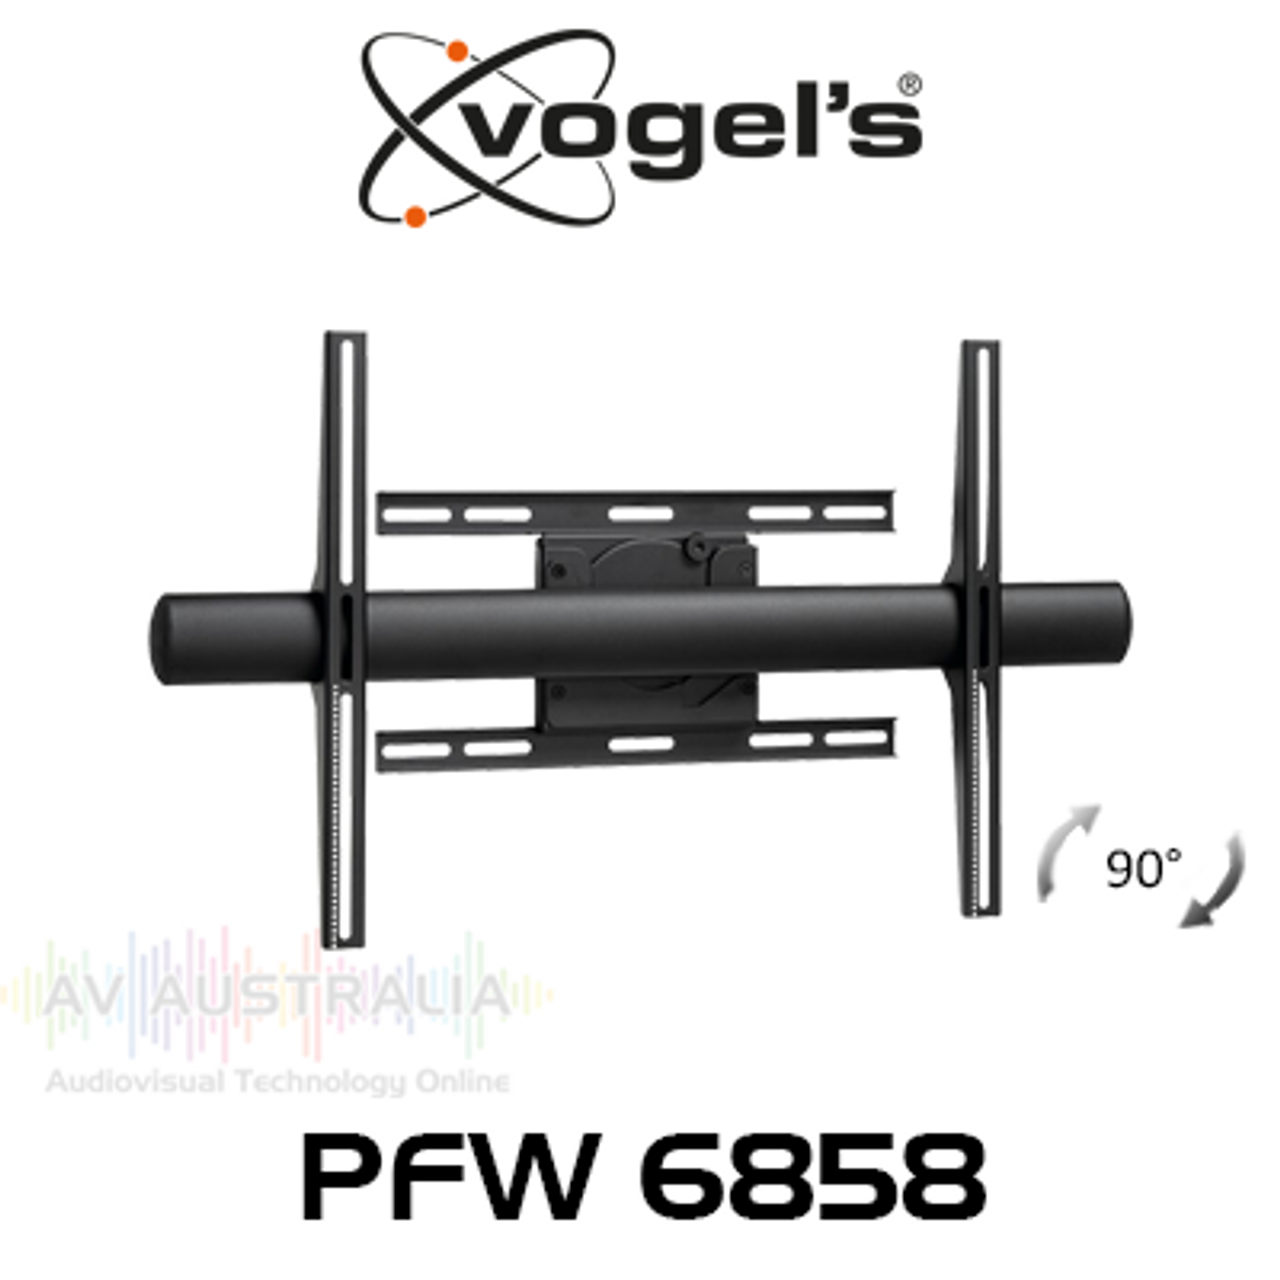 Vogels PFW6858 42-65" Display Rotate Wall Mount (up to 72kg)